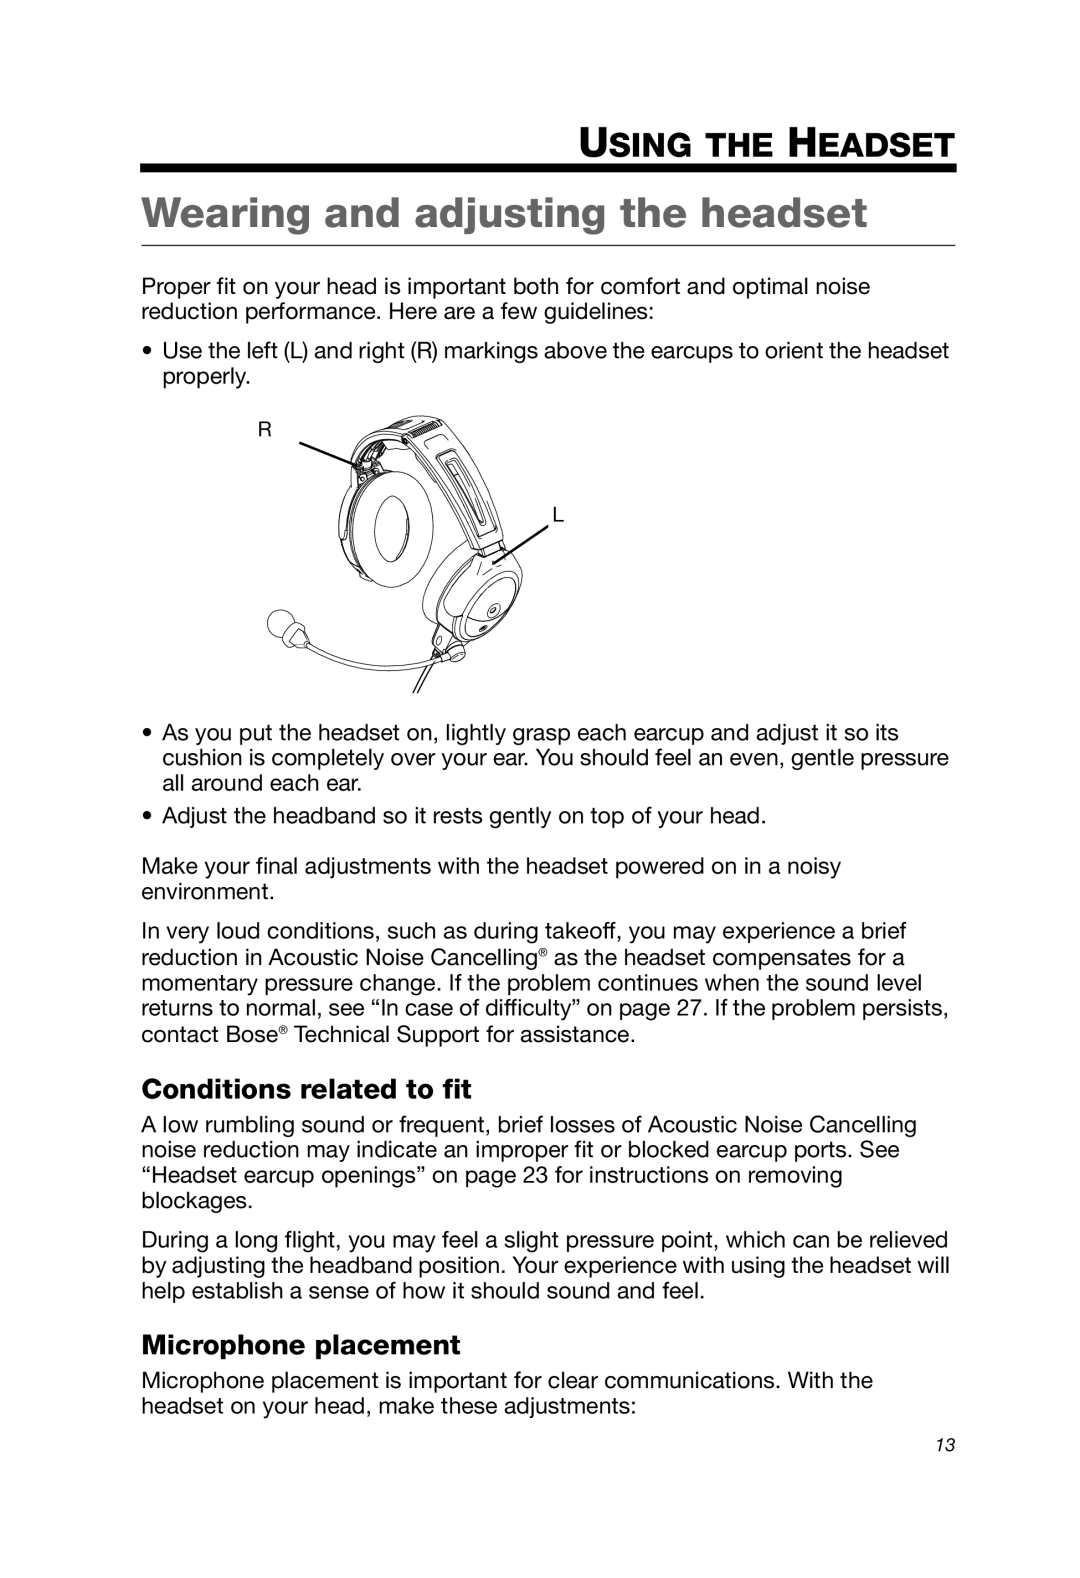 Bose A20 manual Wearing and adjusting the headset, Using The Headset, Conditions related to fit, Microphone placement 